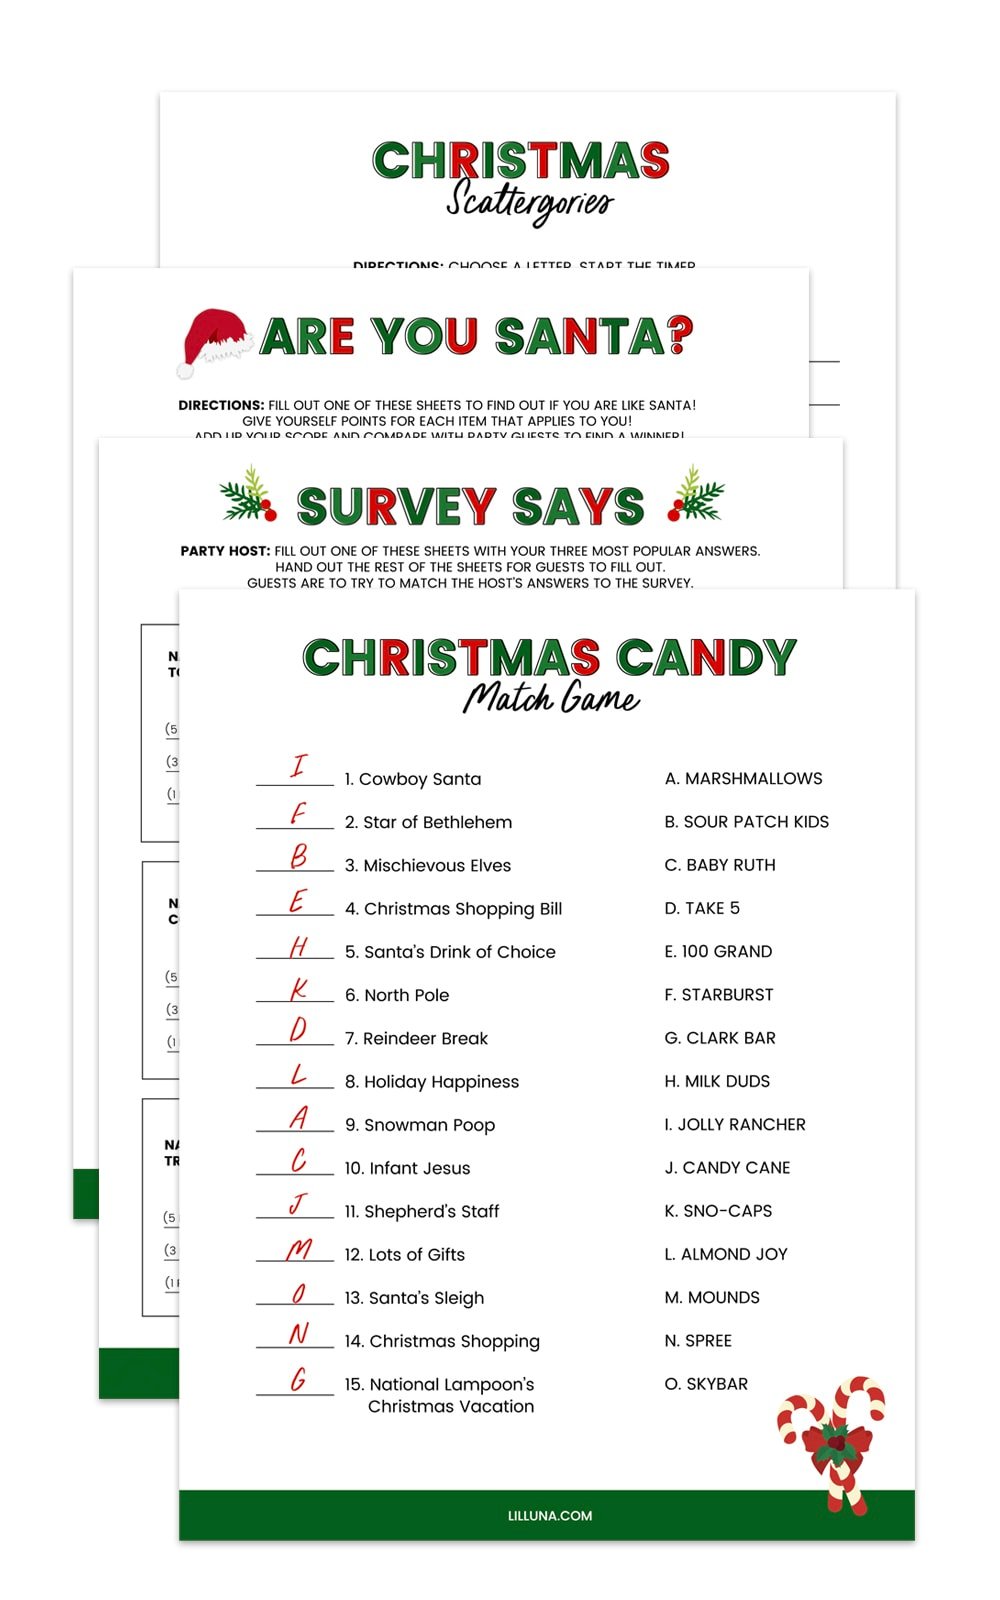 Several free printable Christmas games ready for download.